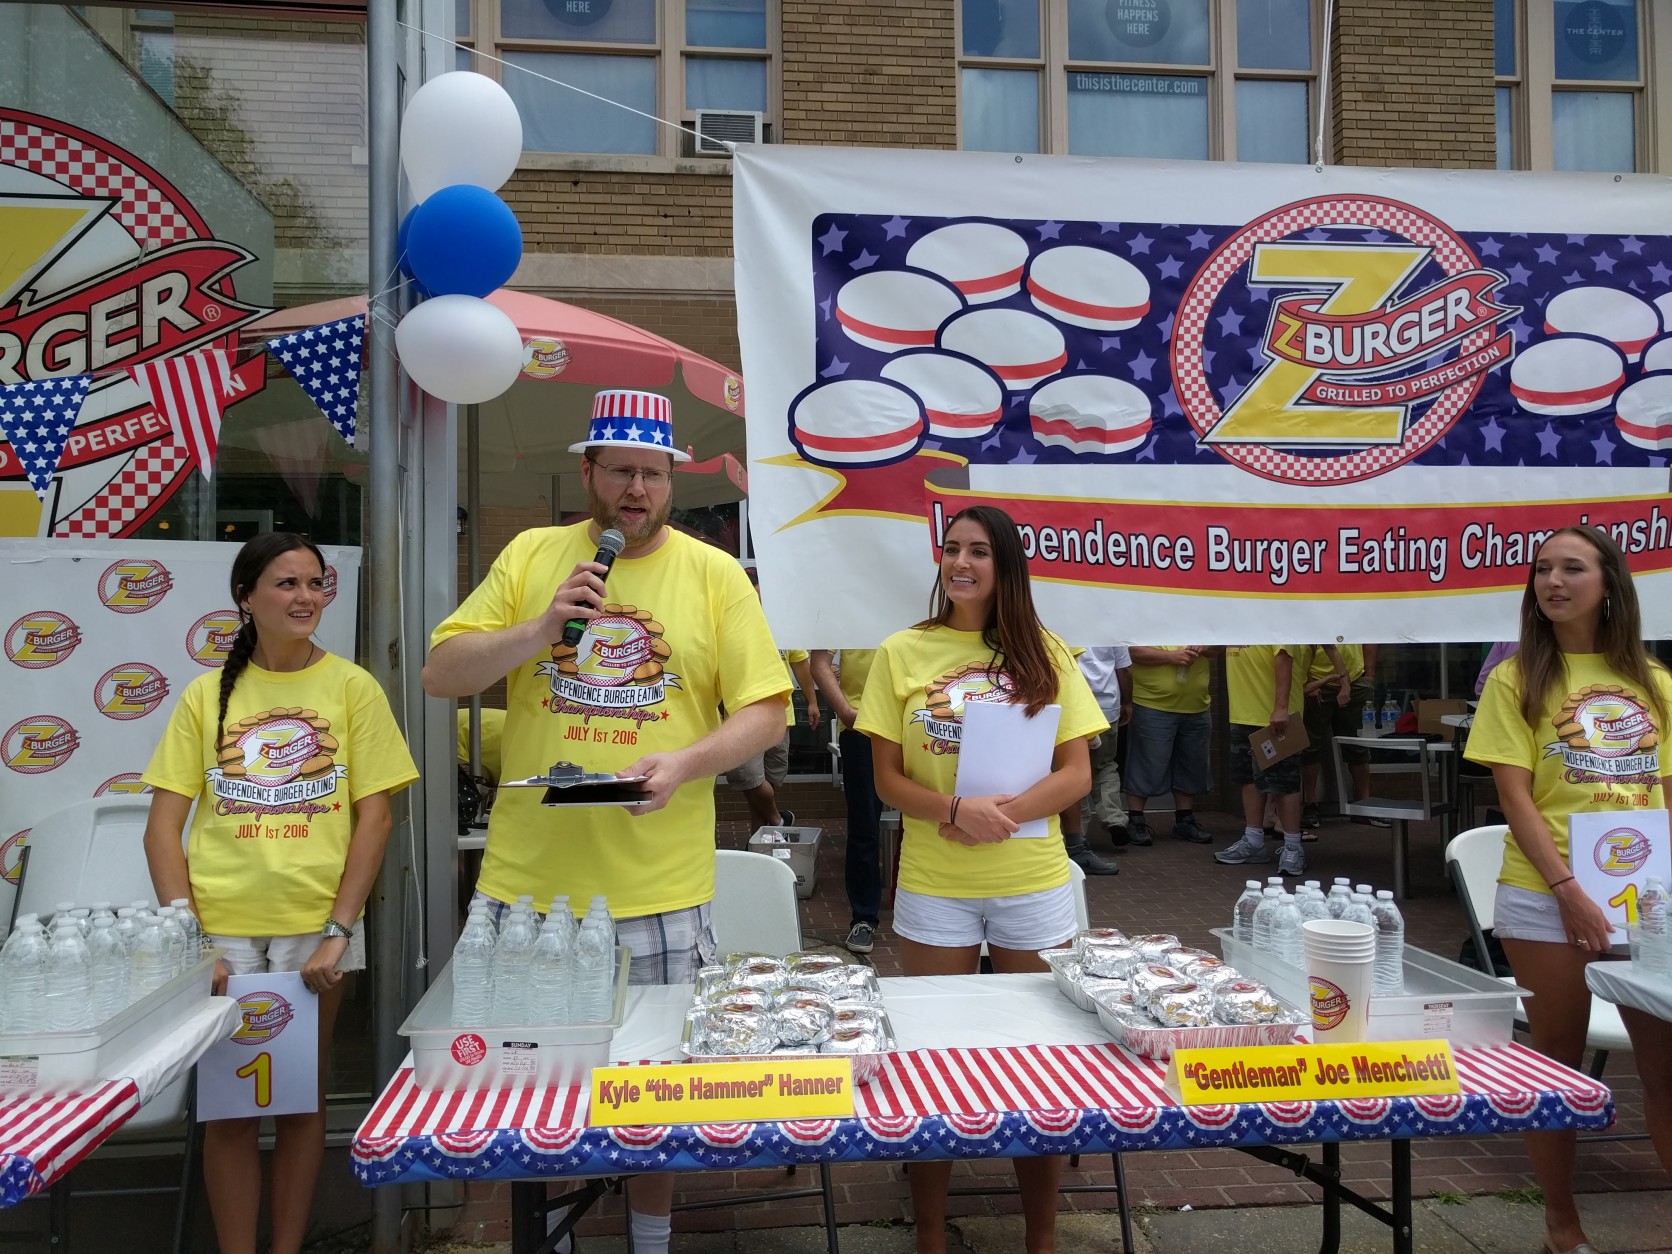 Setting up for the 7th annual Independence Burger Eating Championship at Z-Burger’s Tenleytown location. (WTOP/Ginger Whitaker)